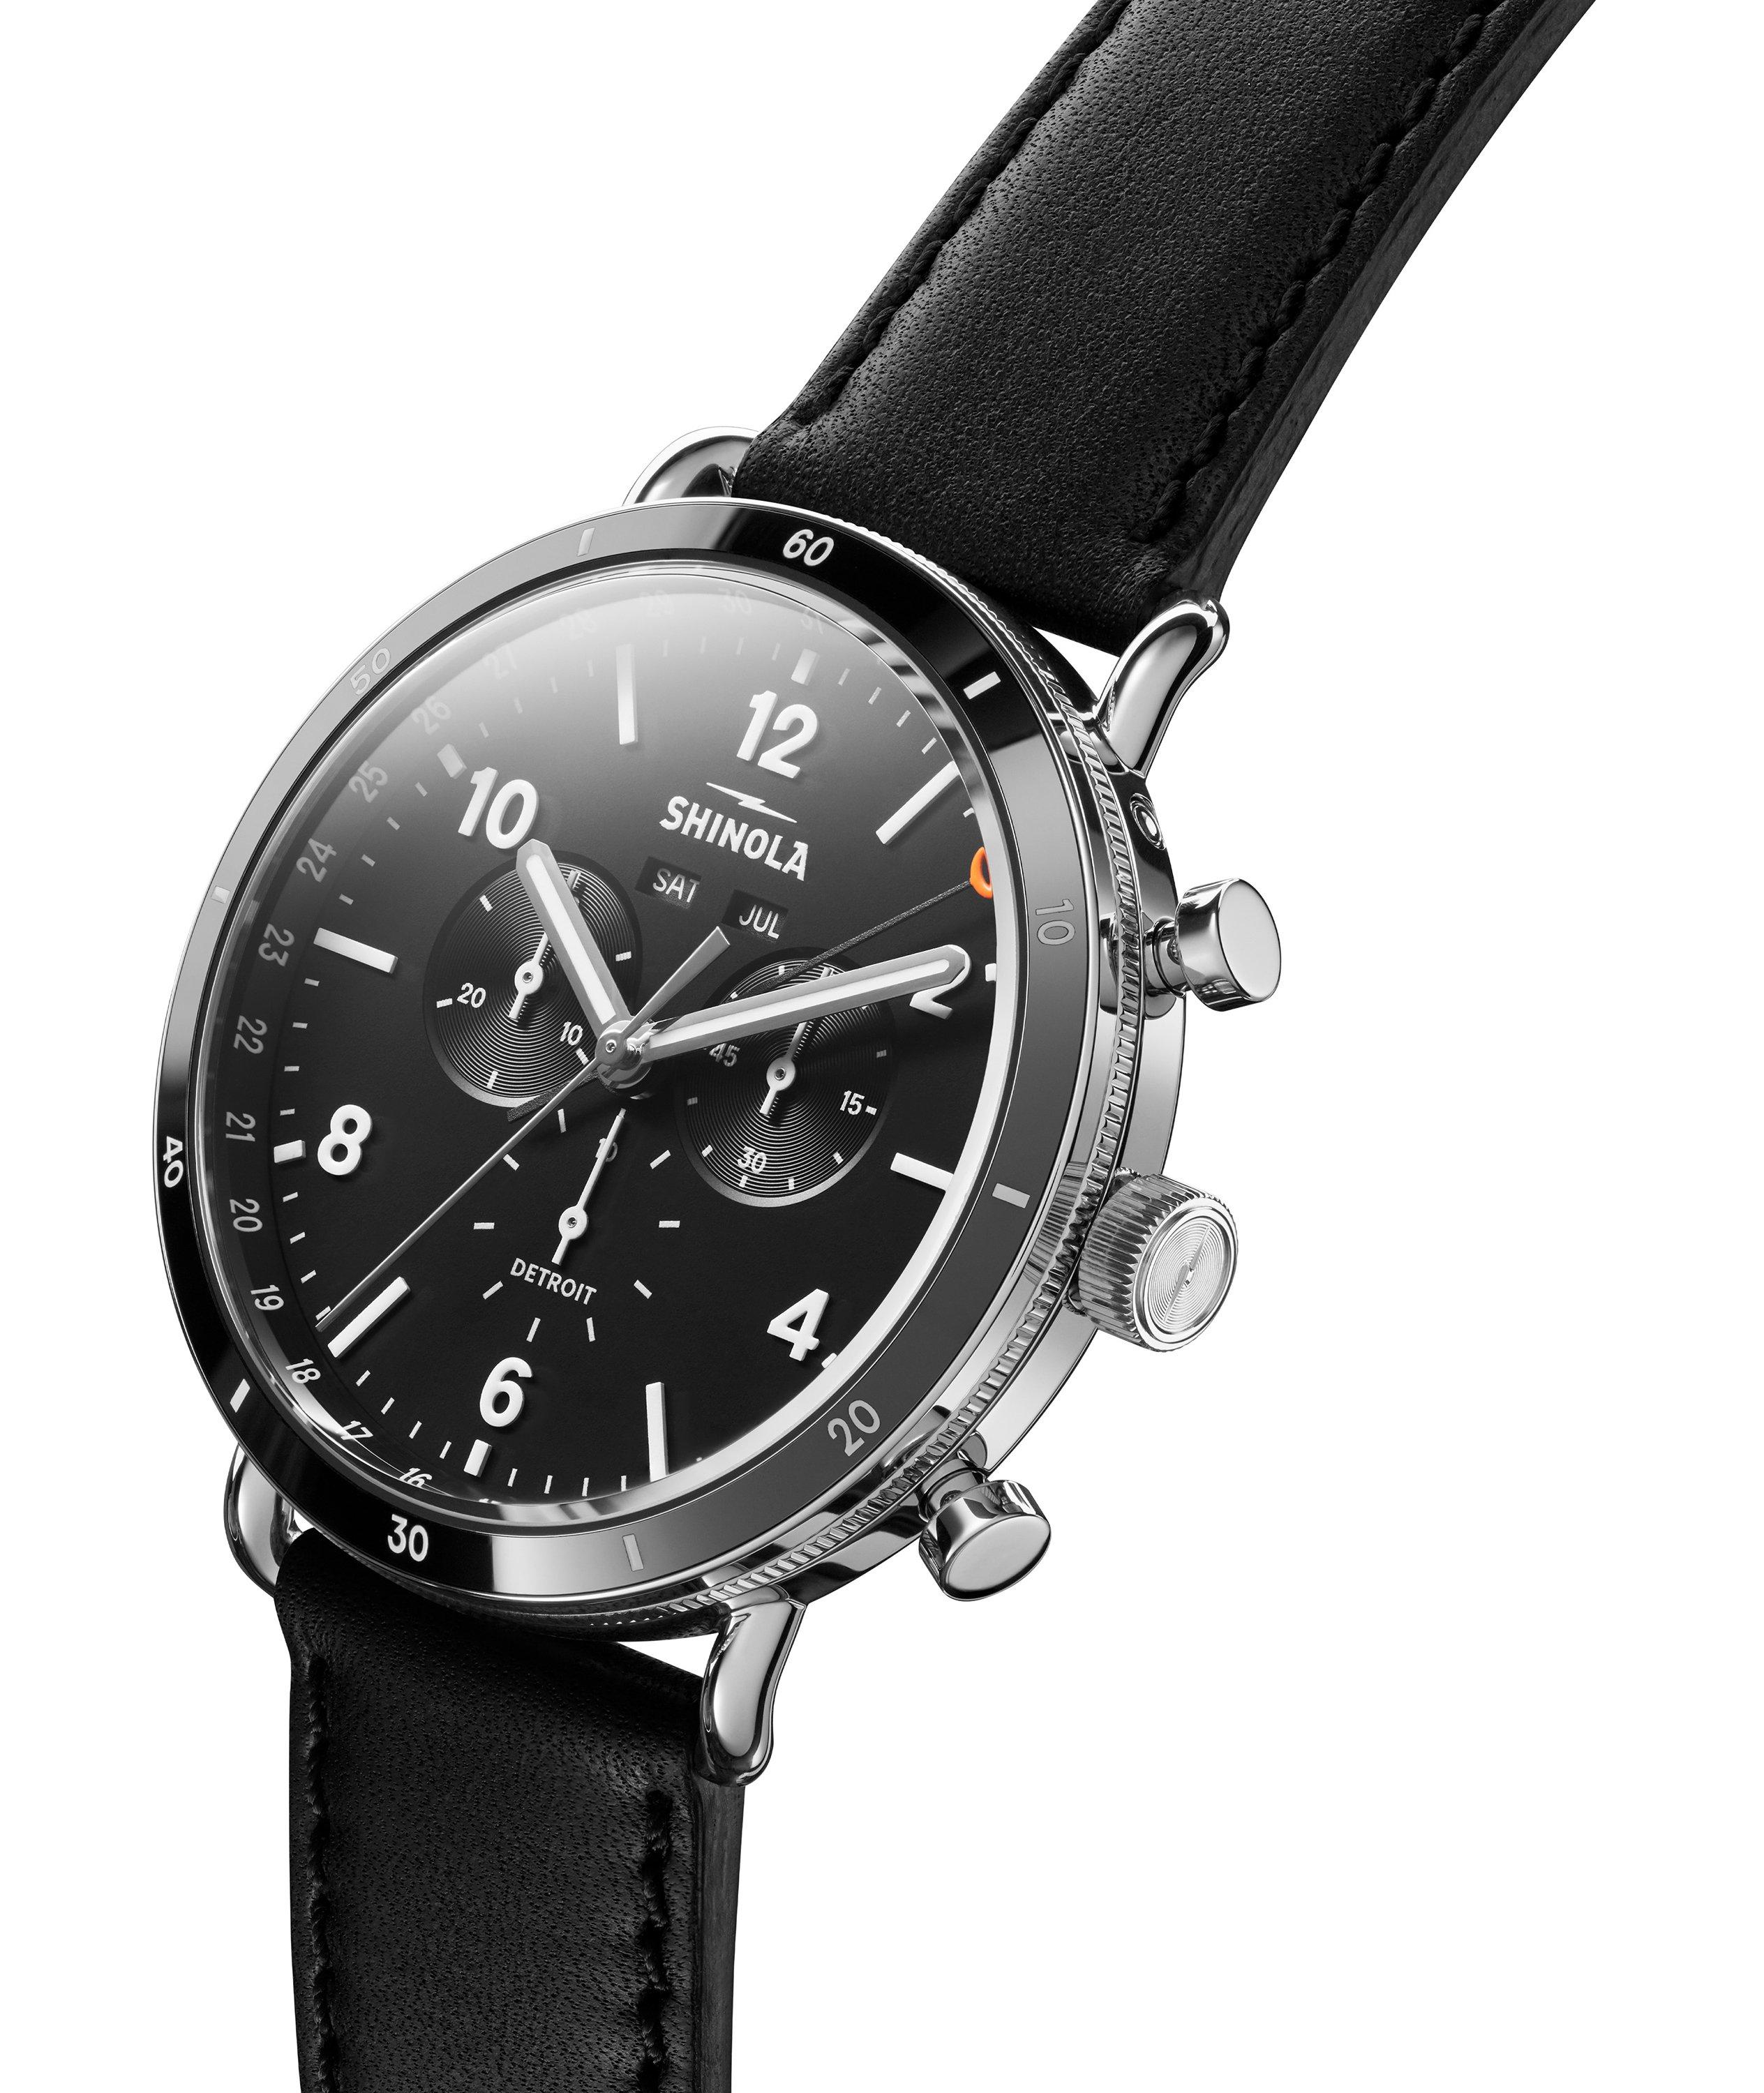 Montre Canfield sport image 1